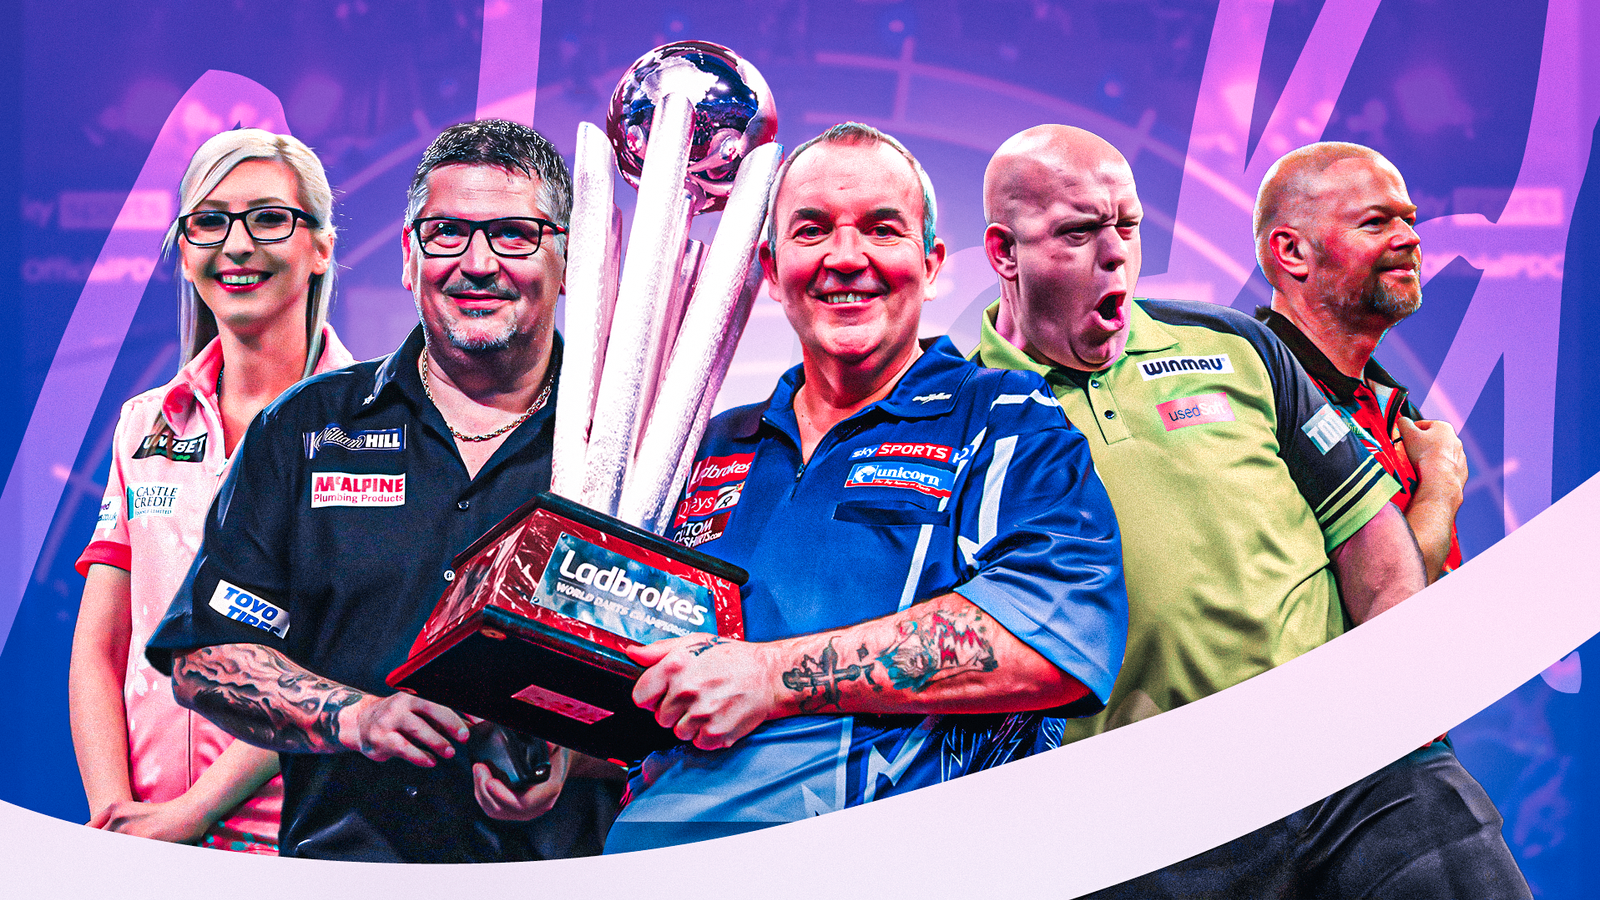 The Ultimate Guide to the PDC Darts World Championship 23-24